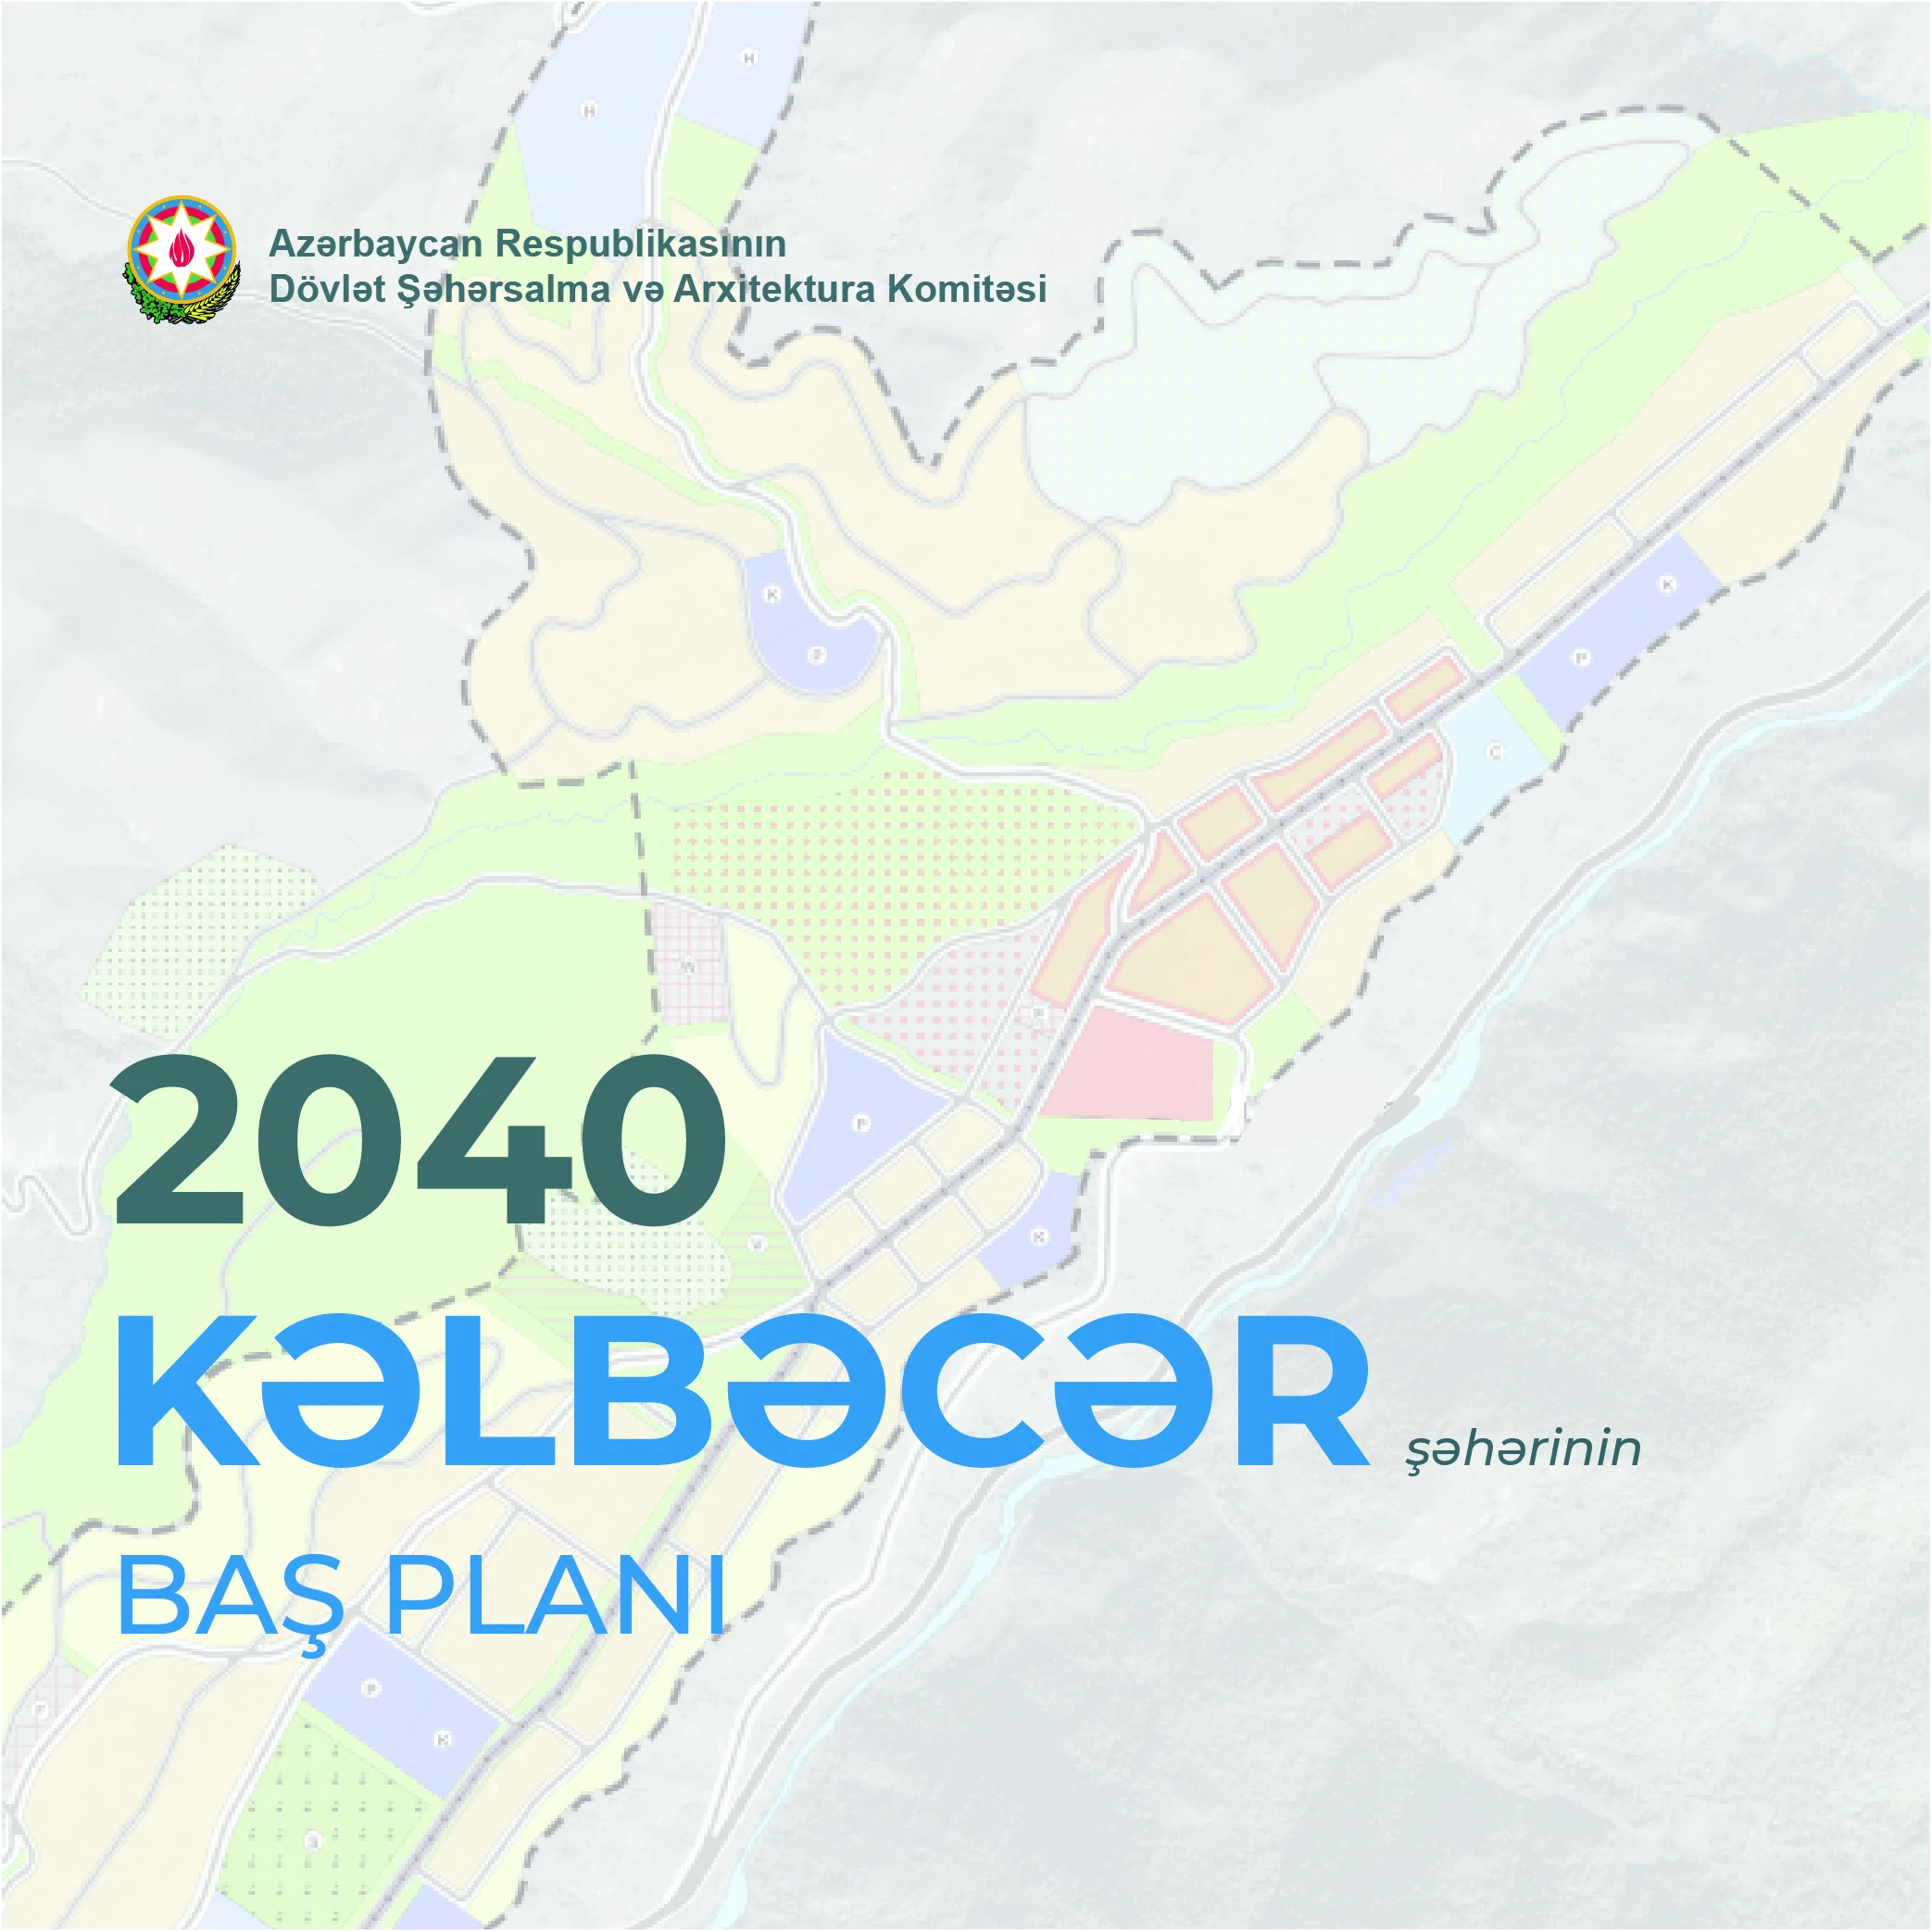 The Master Plan for the development of the Kalbajar city until 2040 has been approved